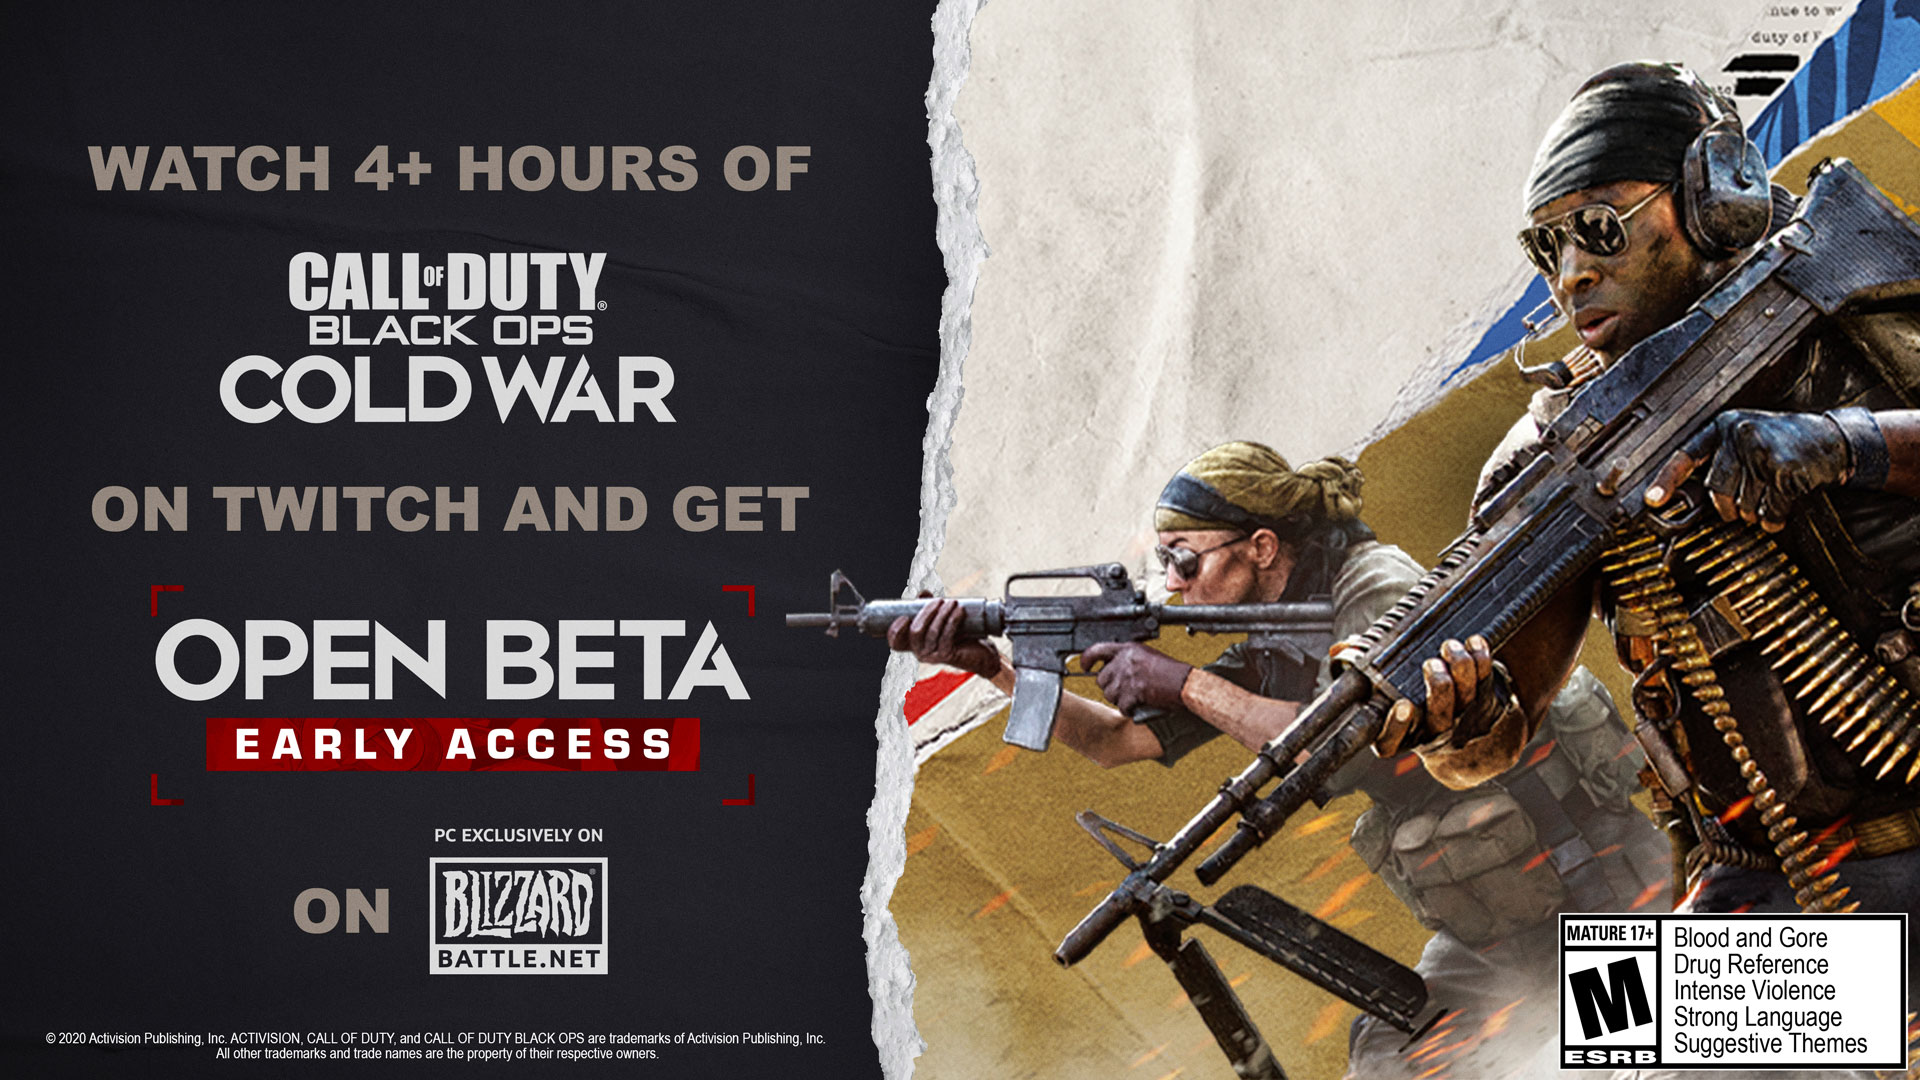 Call of duty cold war beta pc download free software for macbook pro